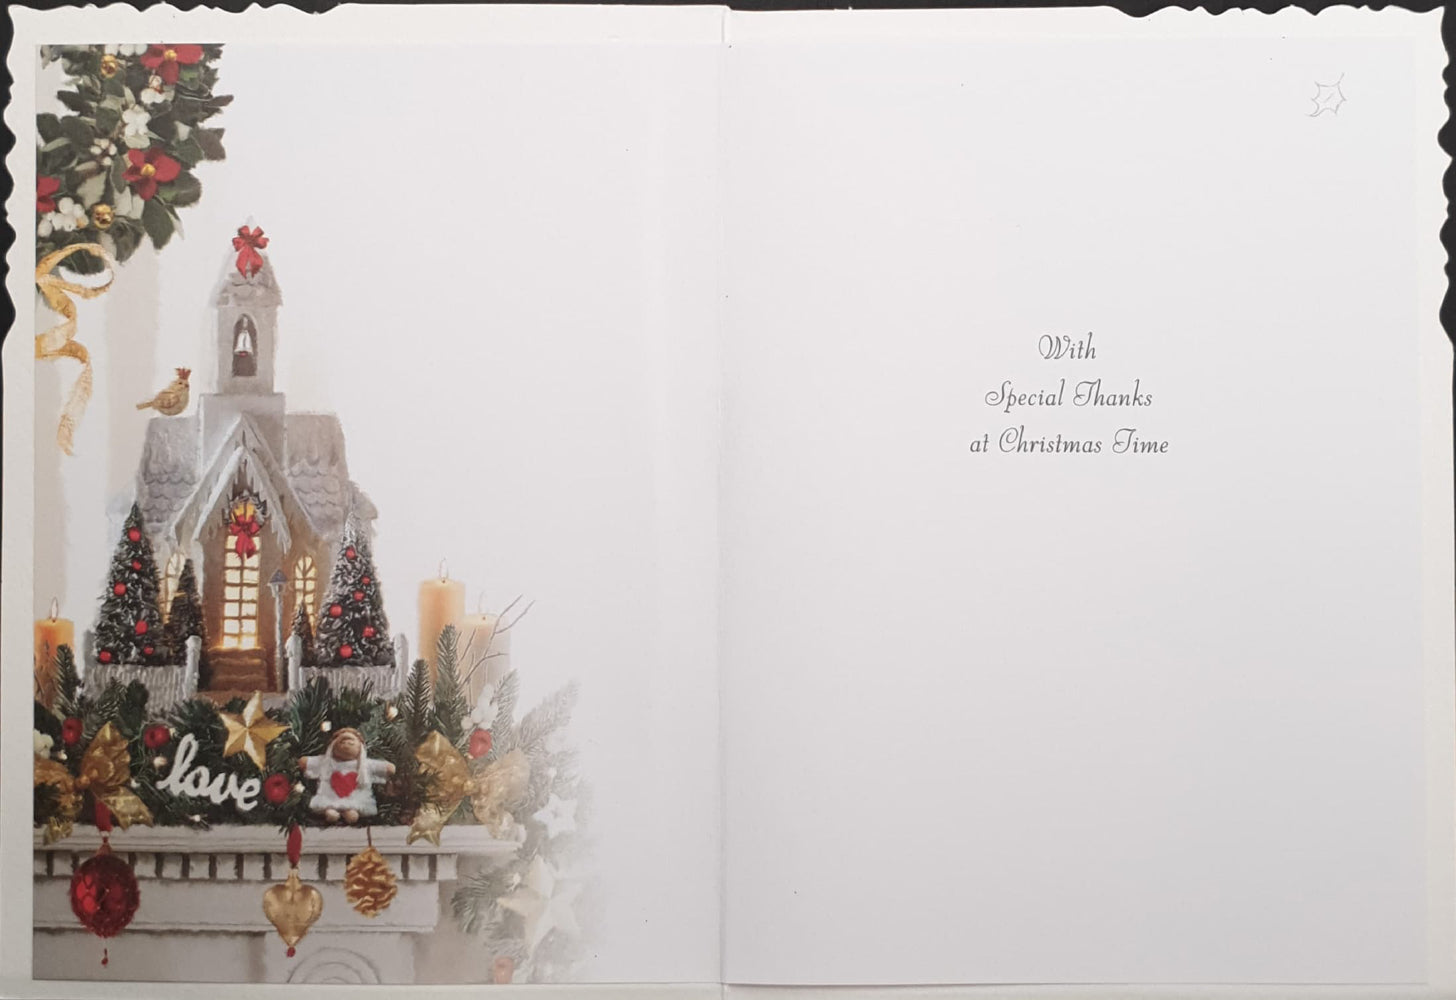 Thank You Christmas Card - With Special Thanks / Christmas Chapel Decorations